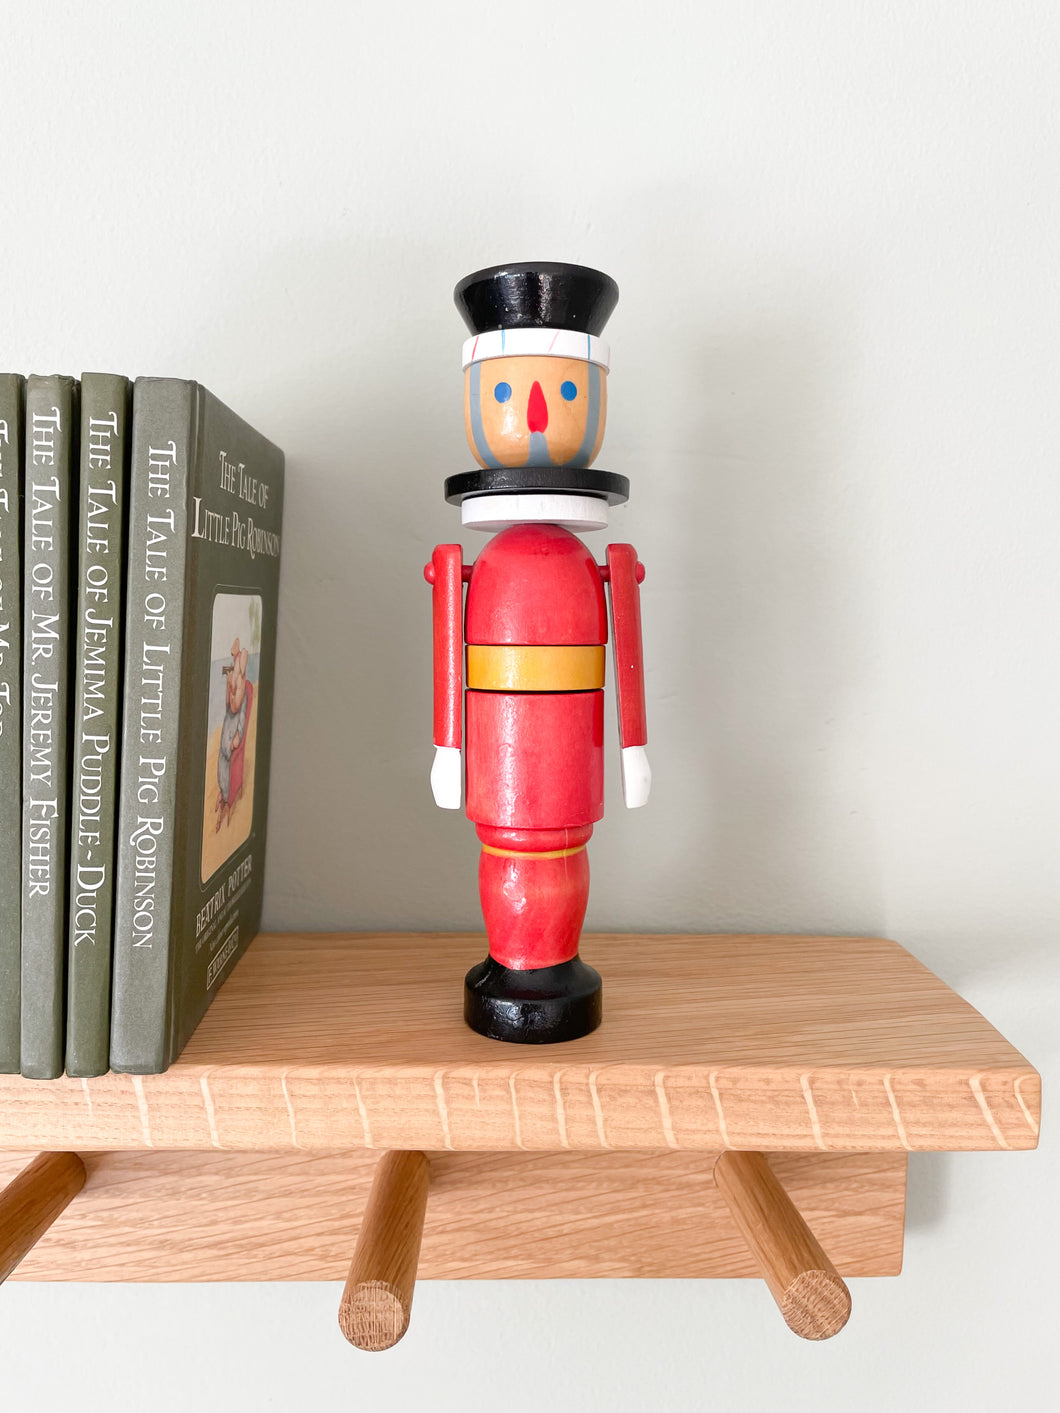 Vintage 1970s wooden stacking toy soldier - Moppet